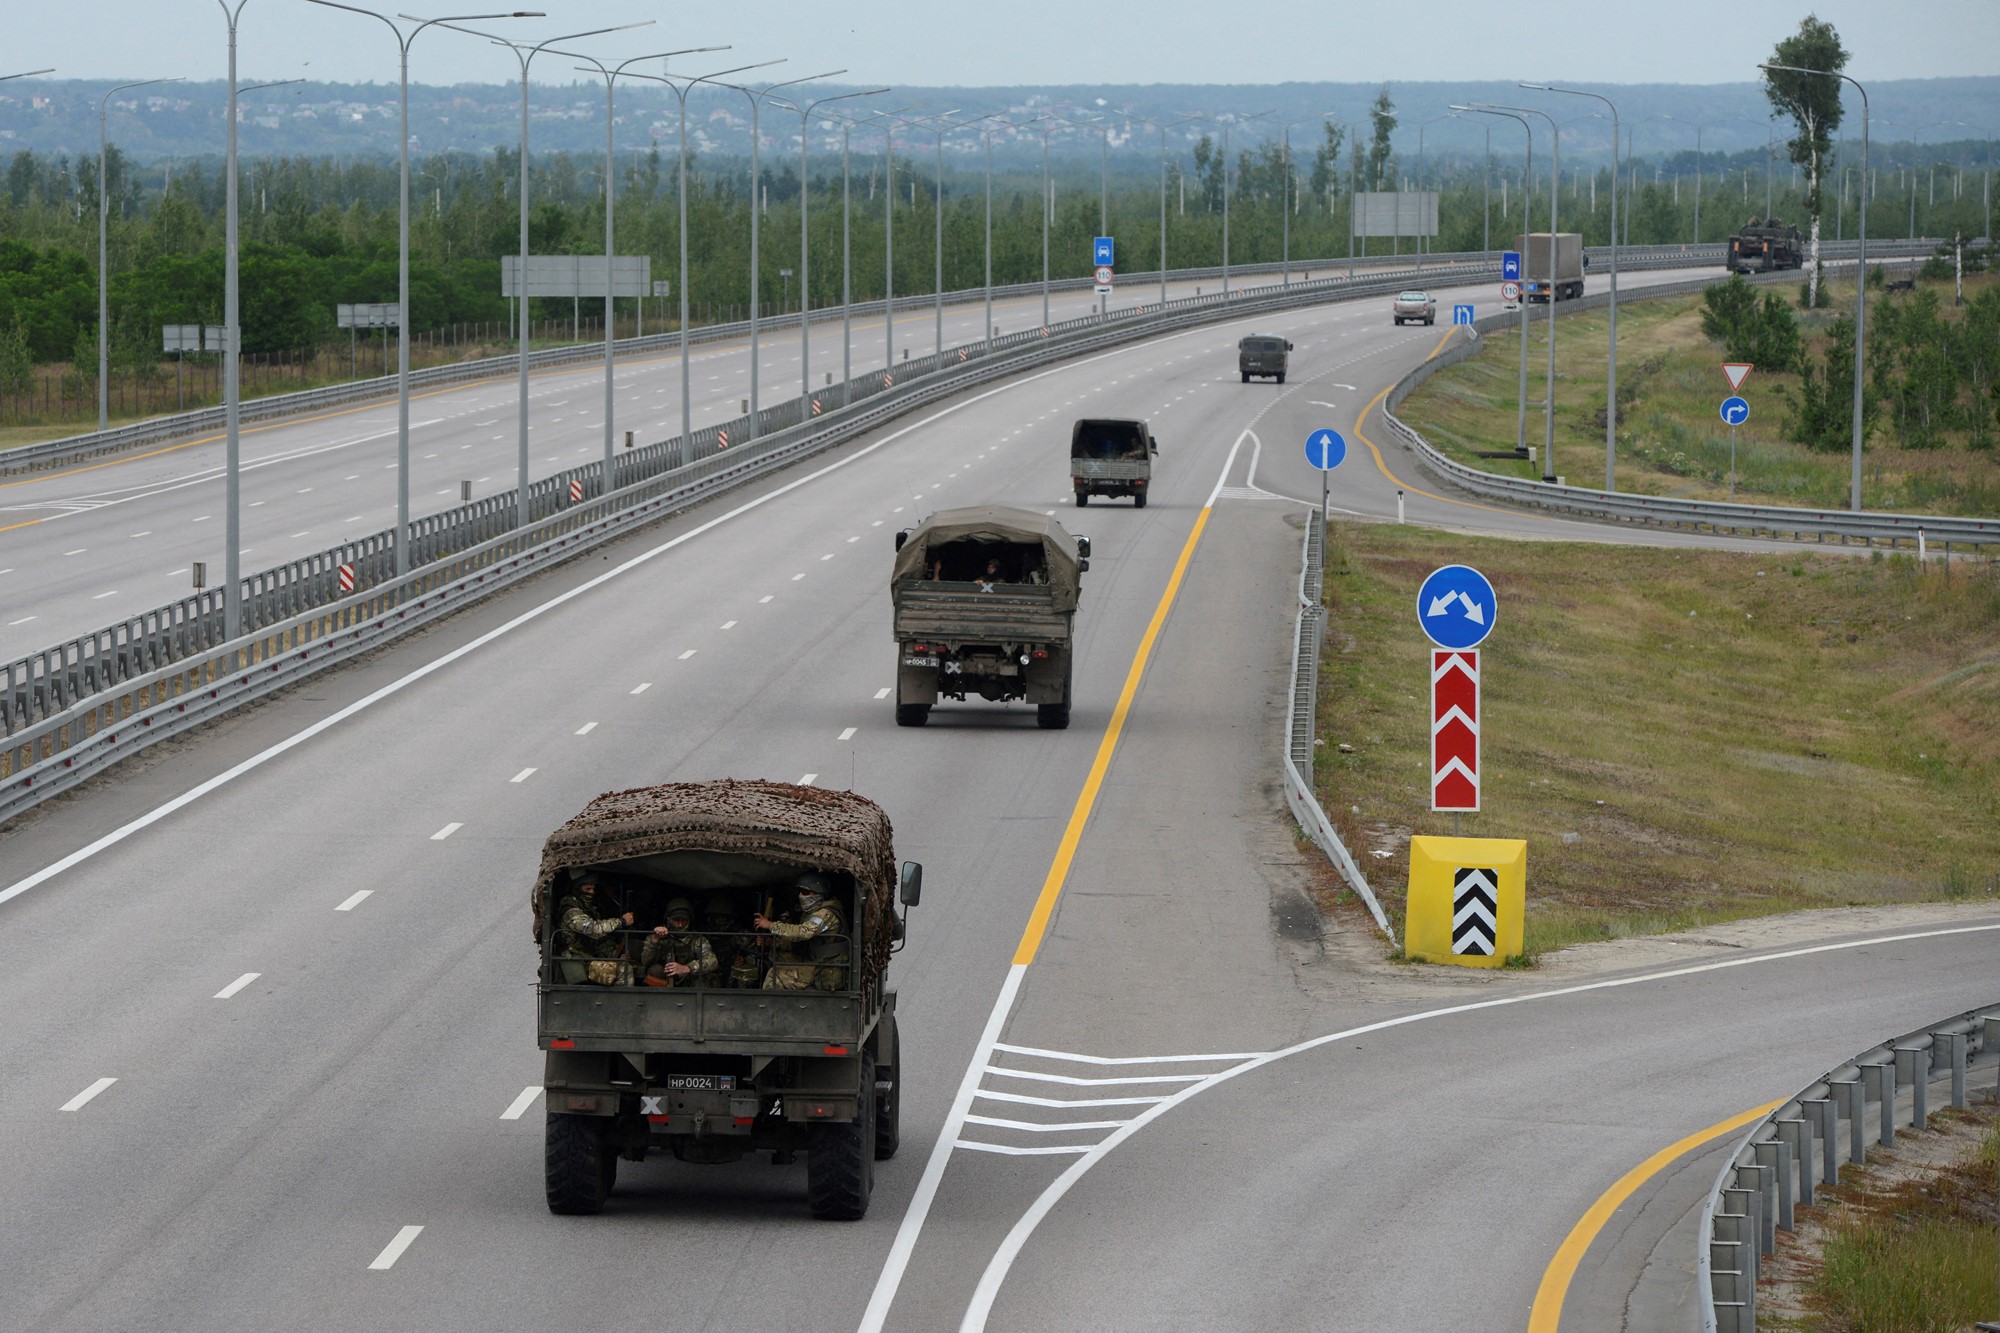 Military vehicles are pictured driving down the highway.